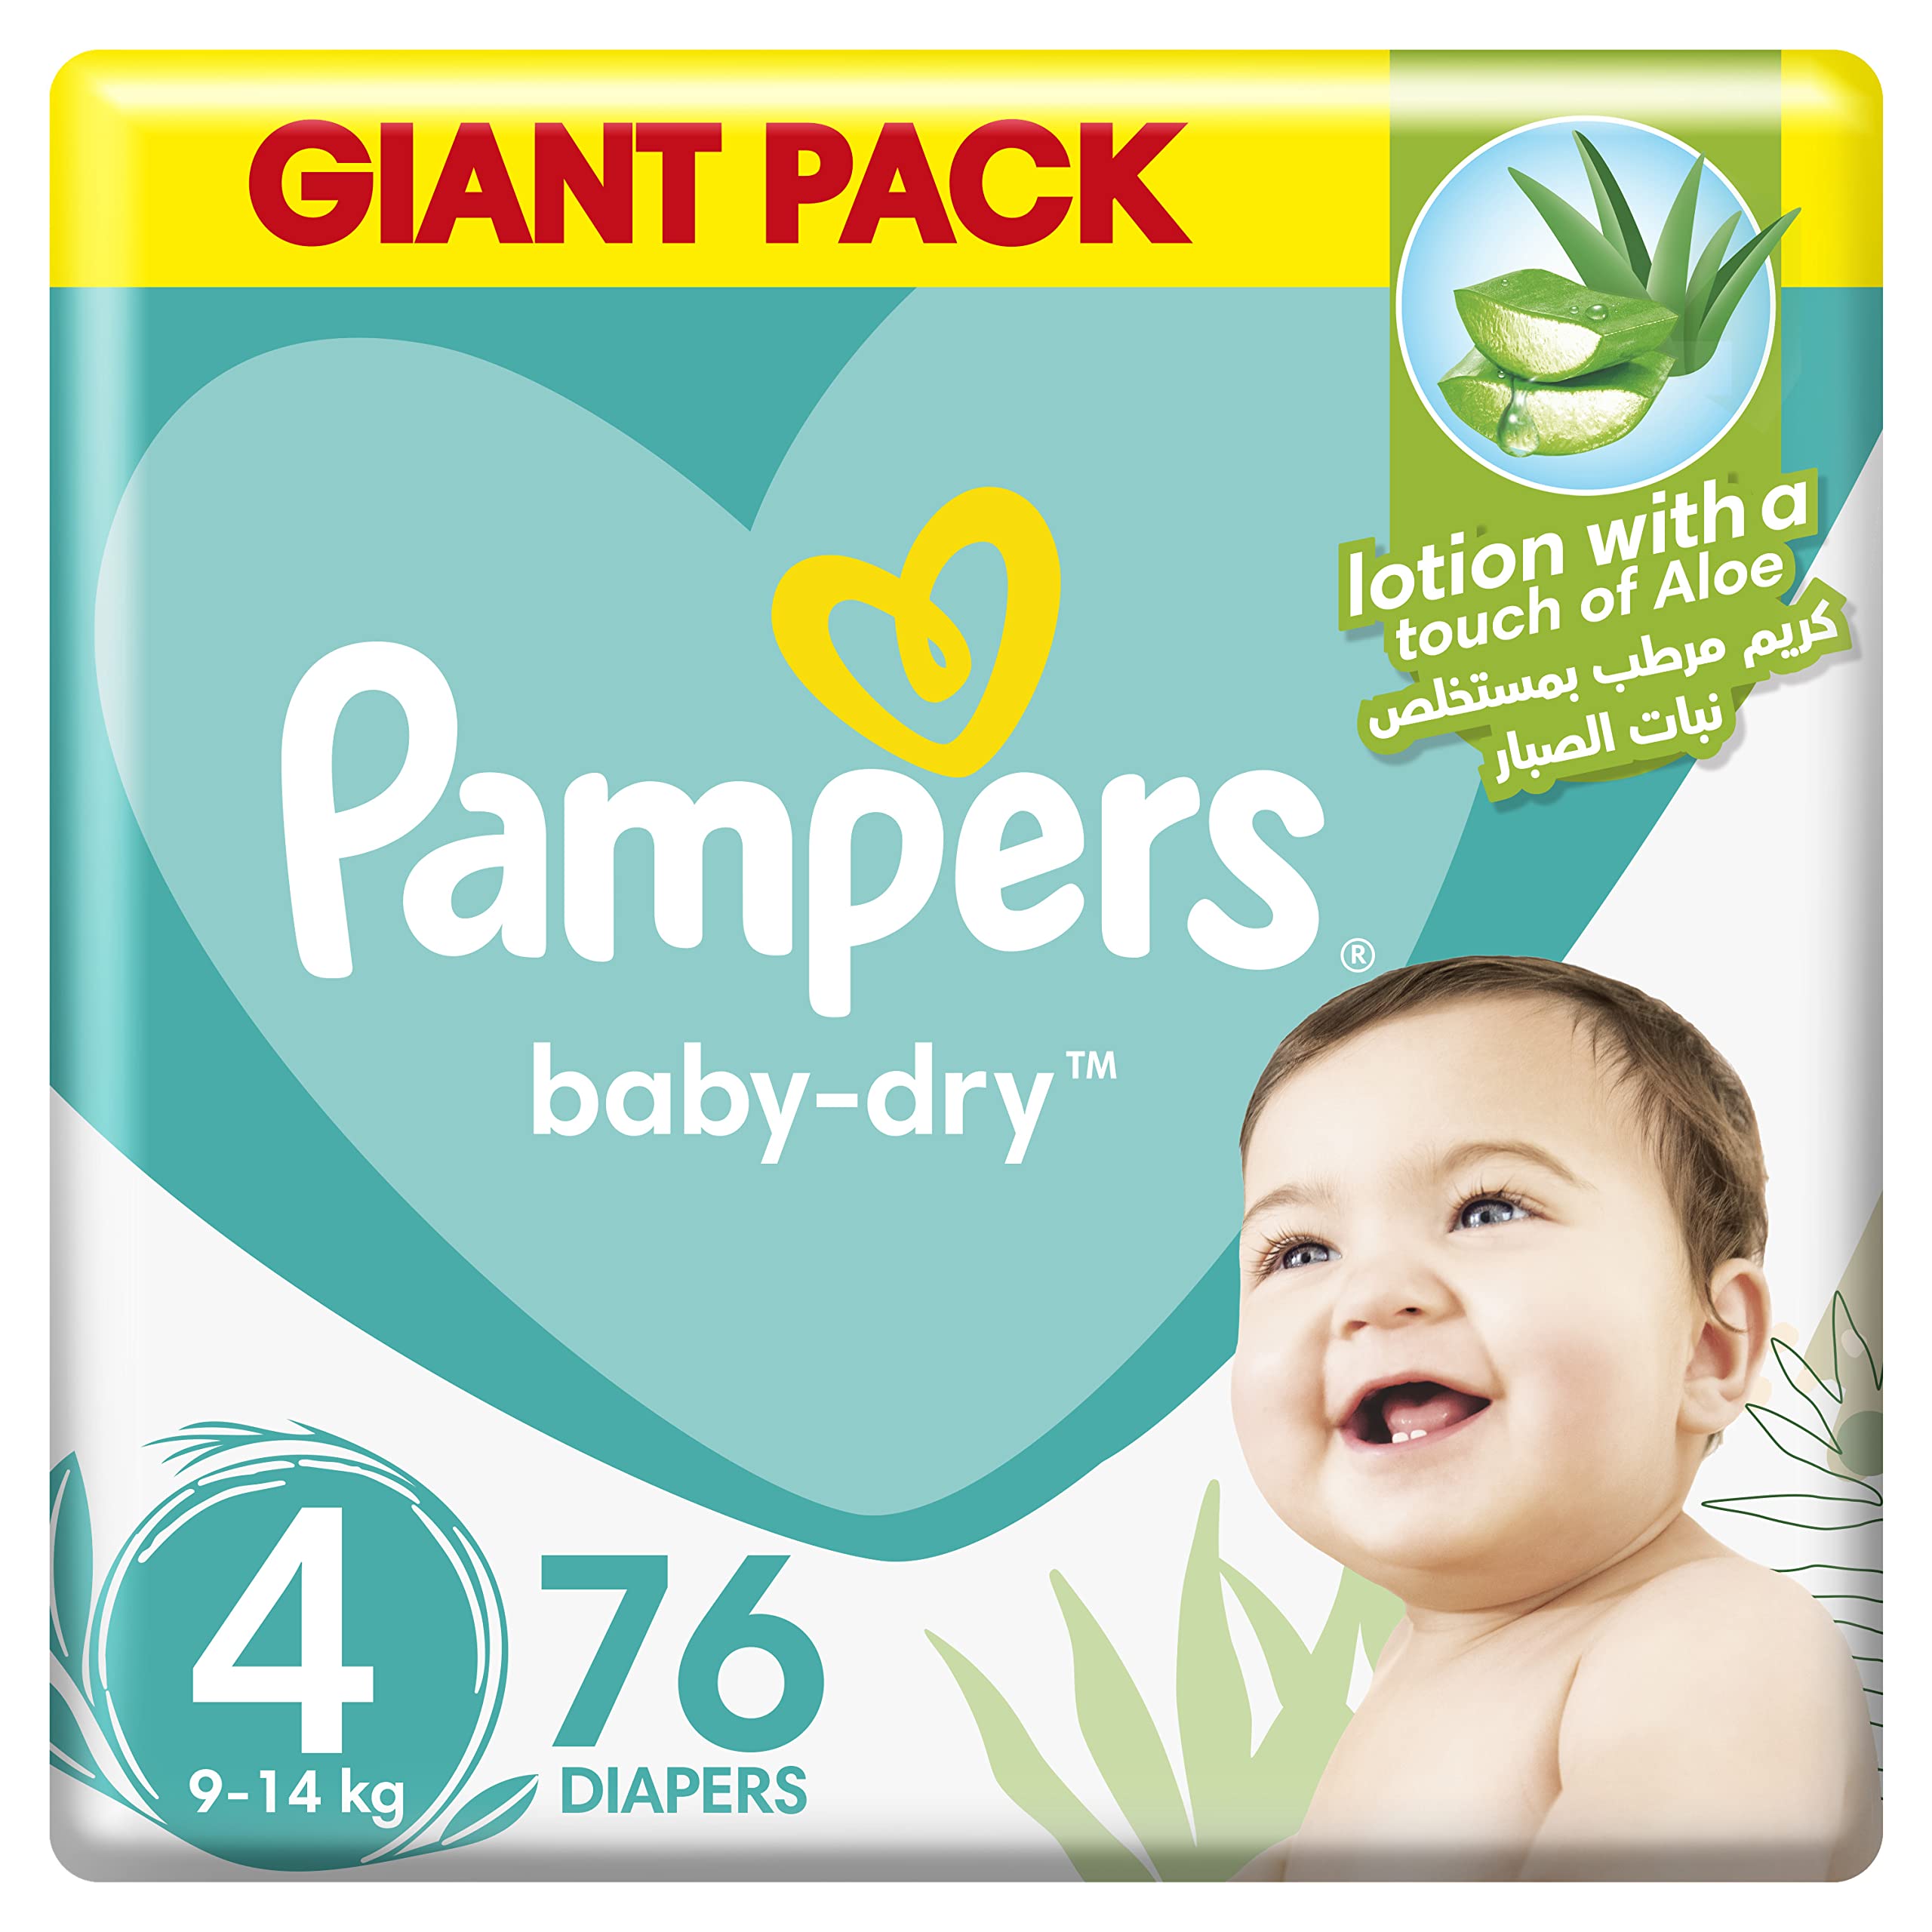 Pampers Baby-Dry Diapers with Aloe Vera Lotion and Leakage Protection, Size 4, 9-14 kg, 76 Diapers حفاضات بامبرز  مقاس 4، كبير، 9-14 كلغ، عبوة التوفير الكبير، 76 حفاضاً